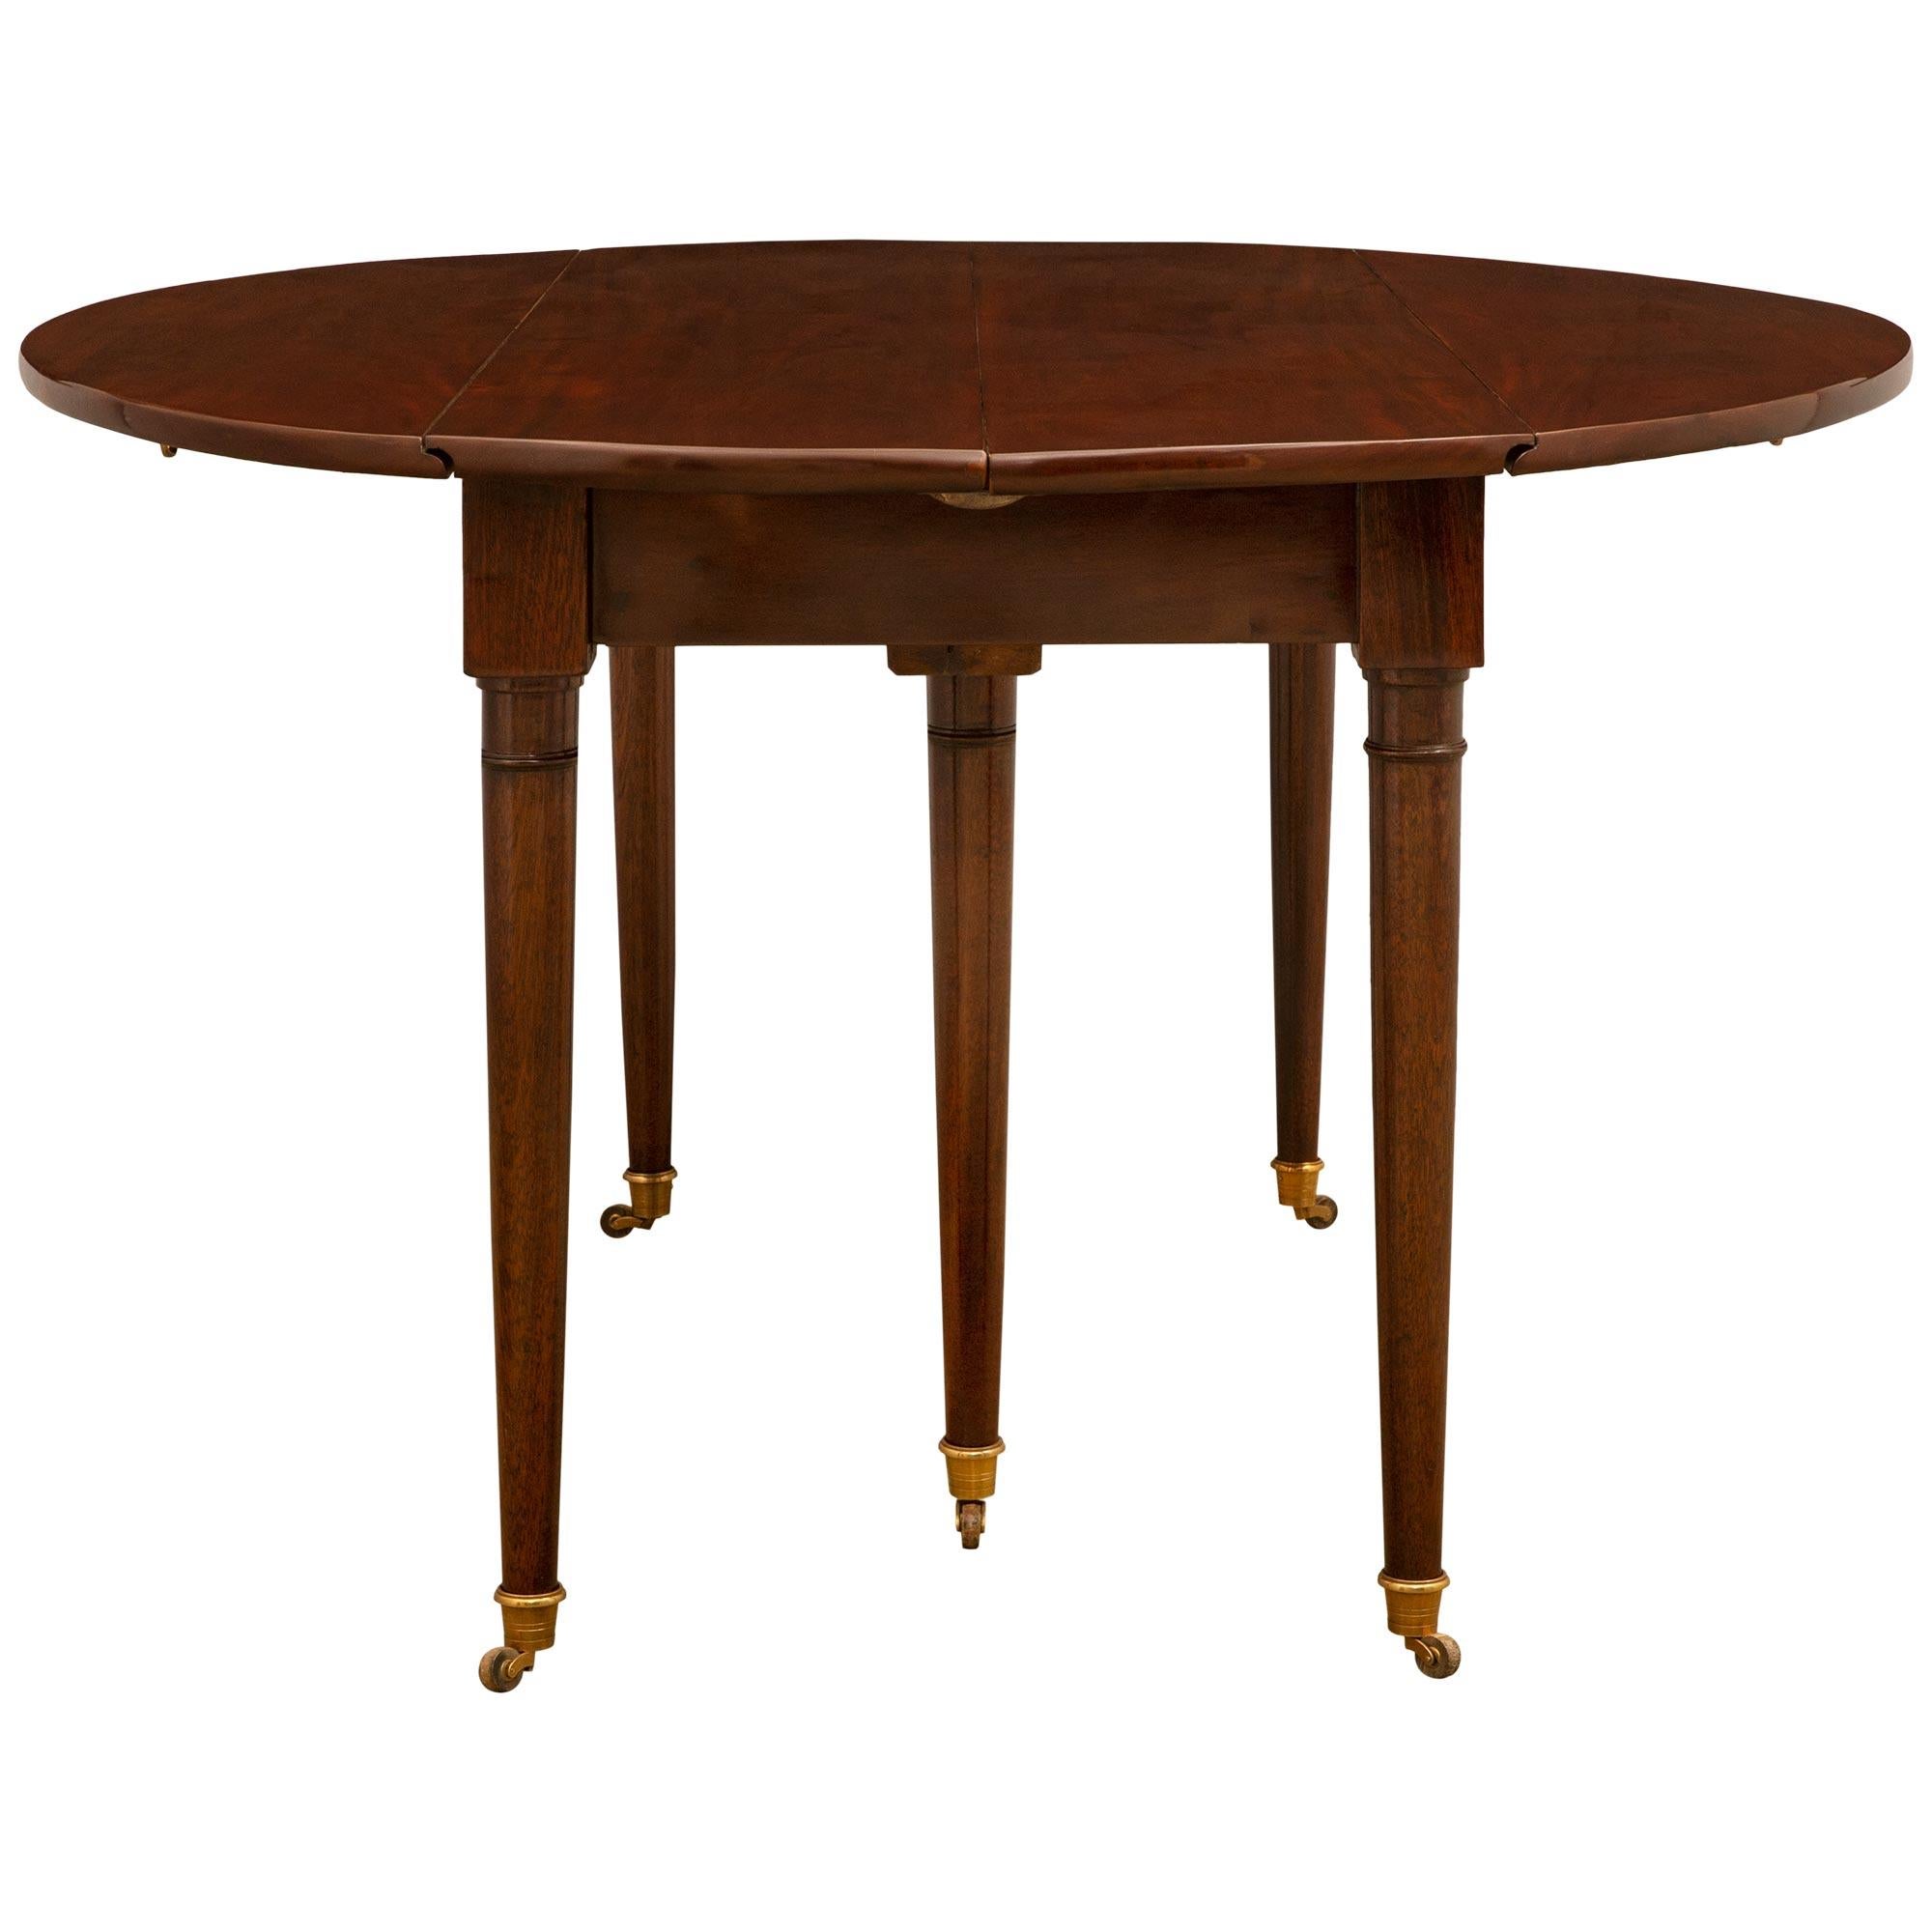 Early 19th Century French Louis XVI Style Mahogany Drop-Leaf Dining Table In Good Condition For Sale In West Palm Beach, FL